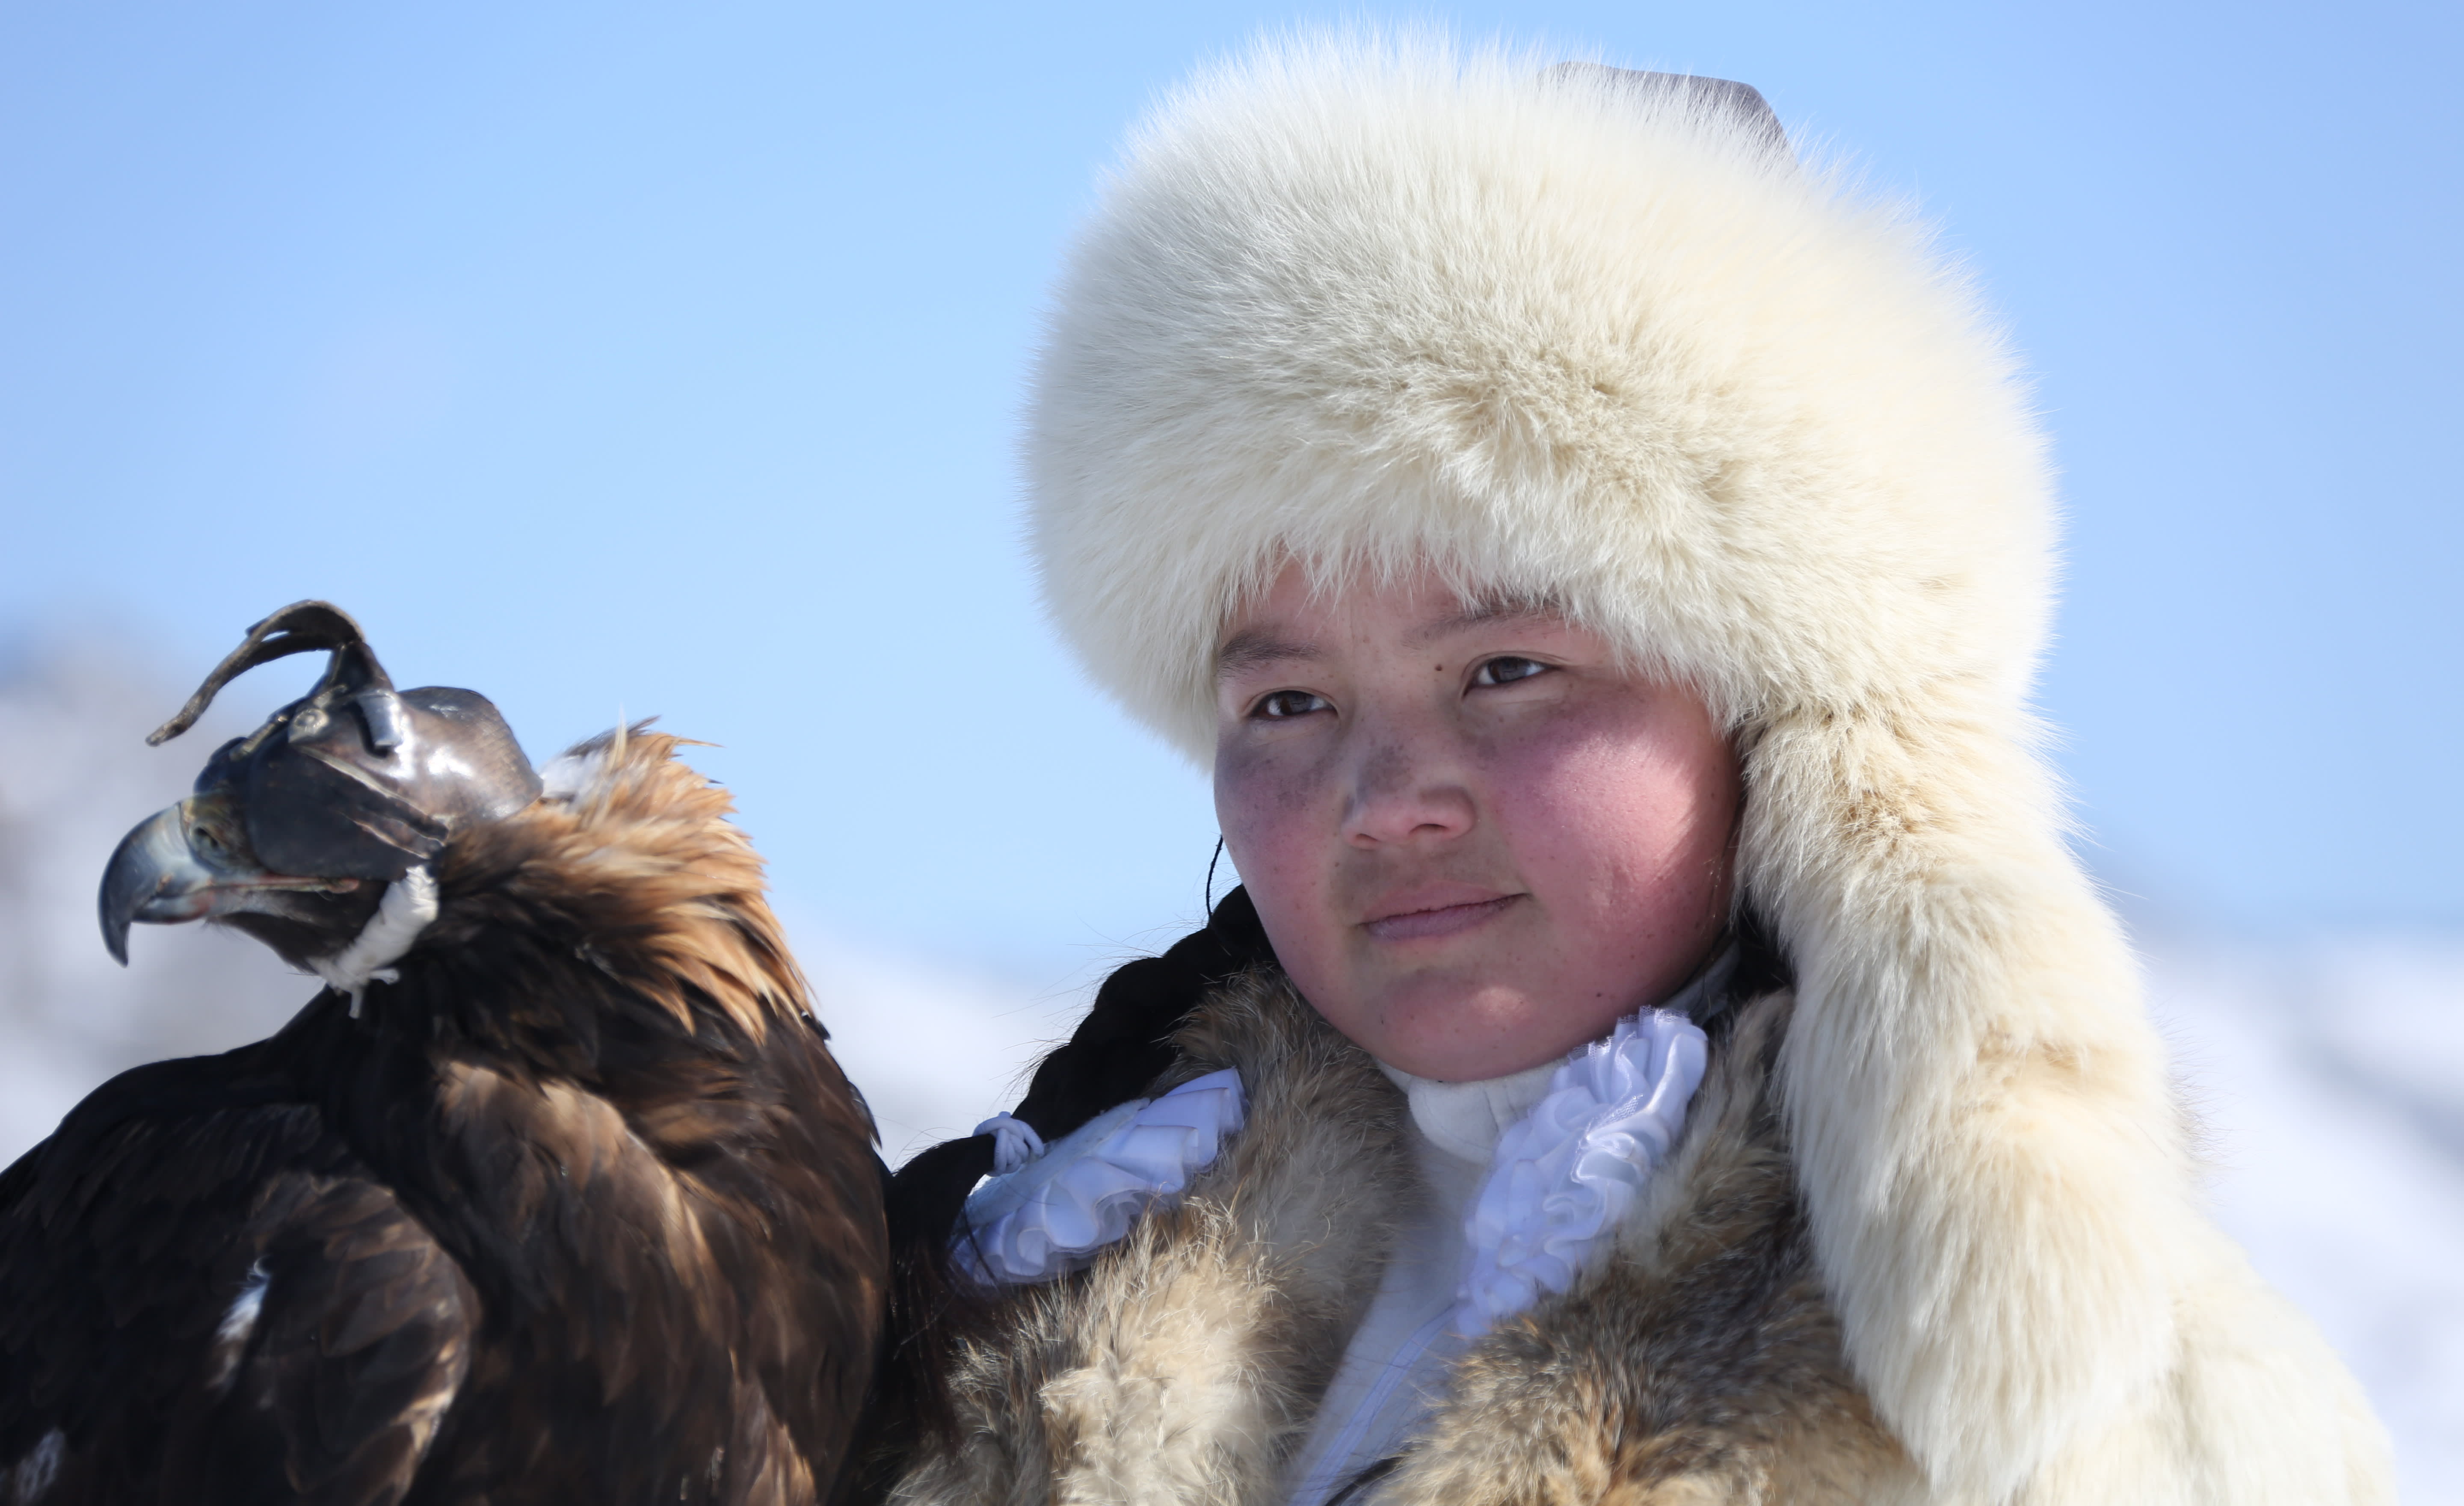 A girl and her eagle help bridge Mongolian ethnic divisions - Nikkei ...